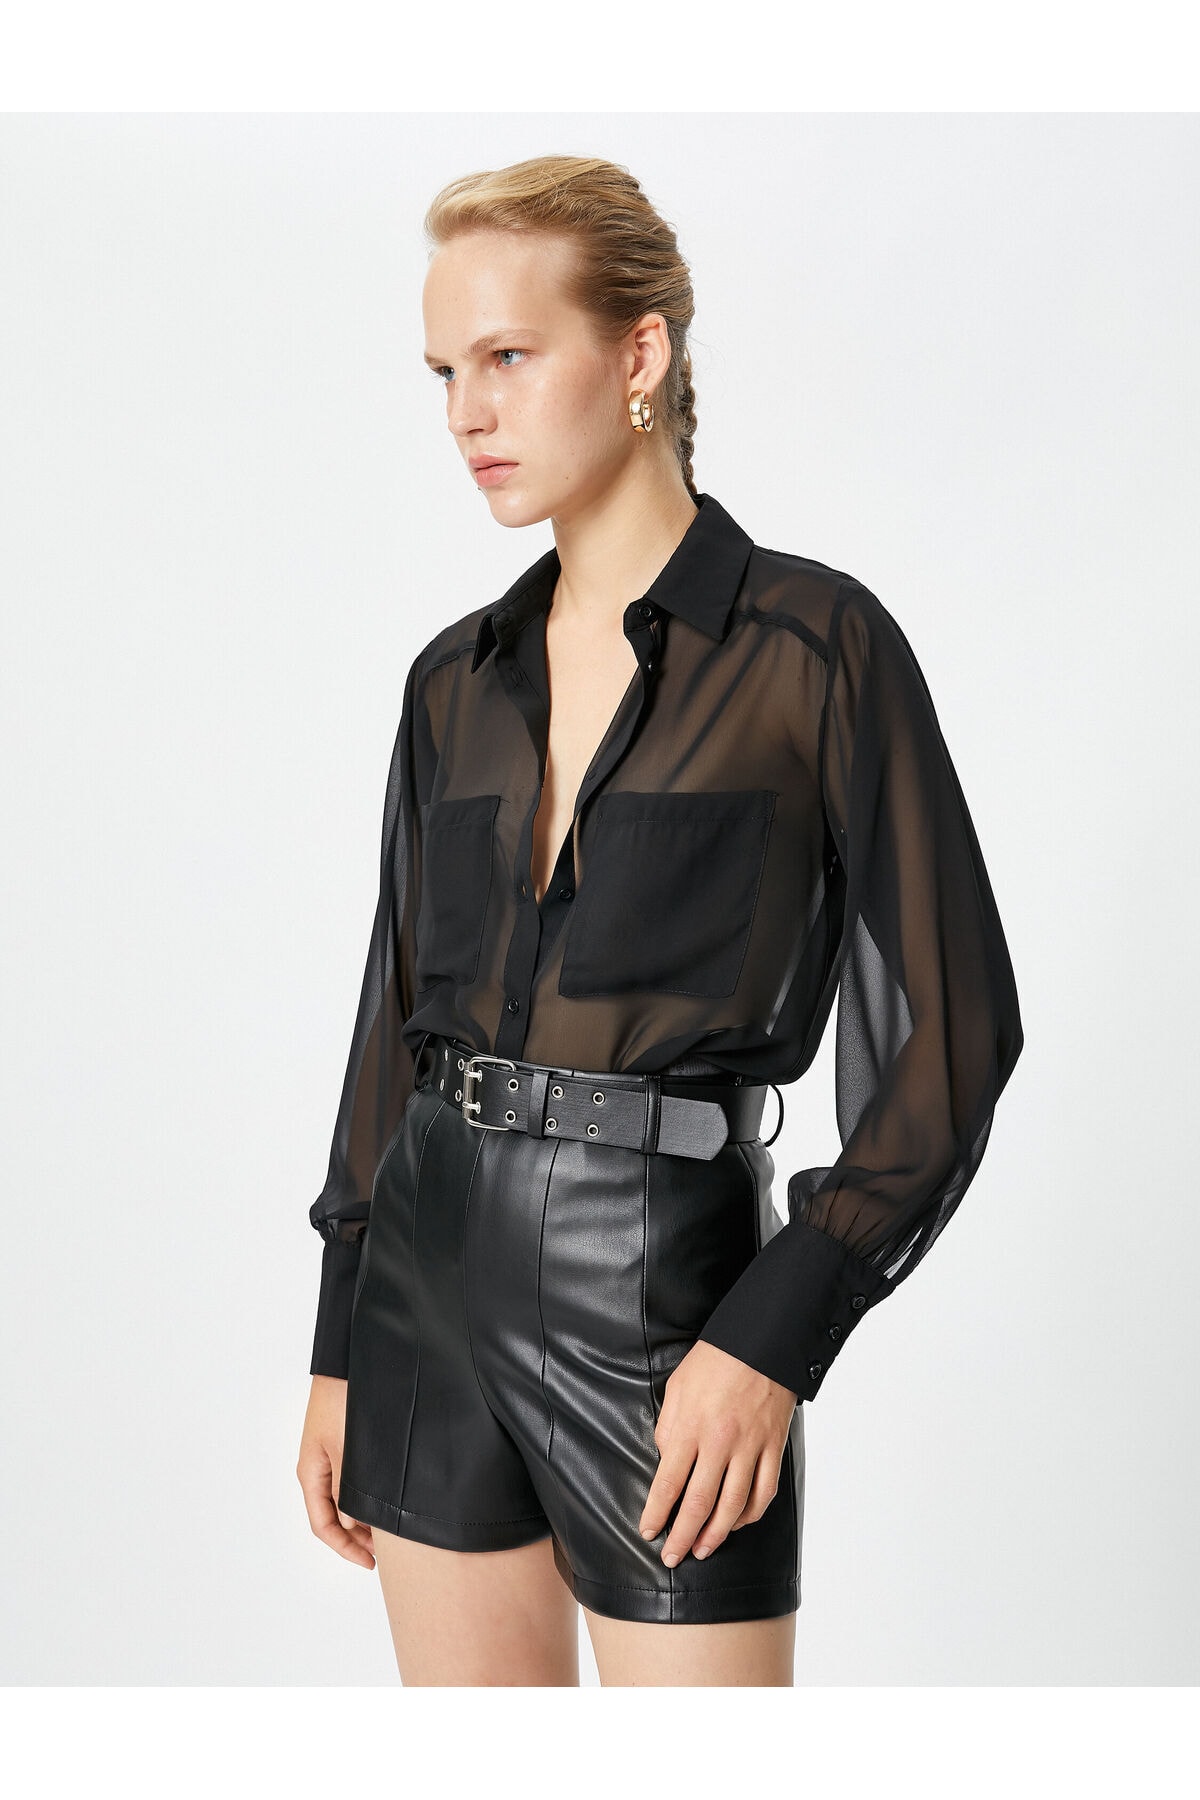 Levně Koton Chiffon Shirt Long Sleeved, Pocket Detailed and Buttoned.